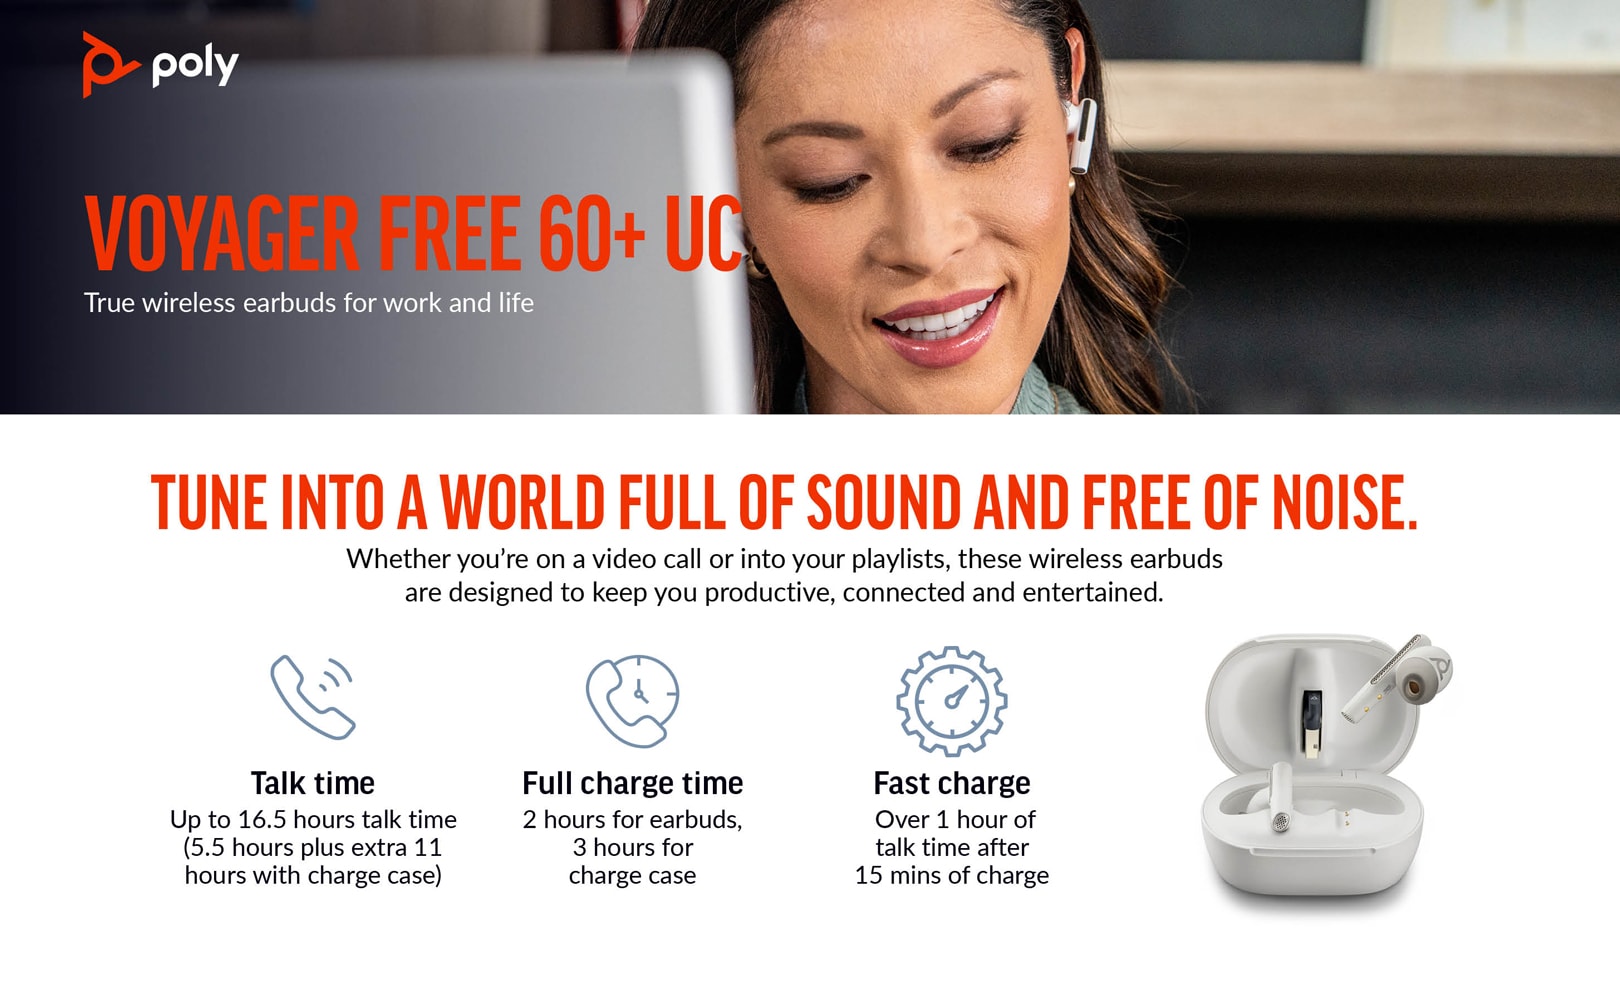 adapter, Charge Voyager White Earbuds, Sand A Touchscreen USB Free Case UC 60+ BT700 Poly